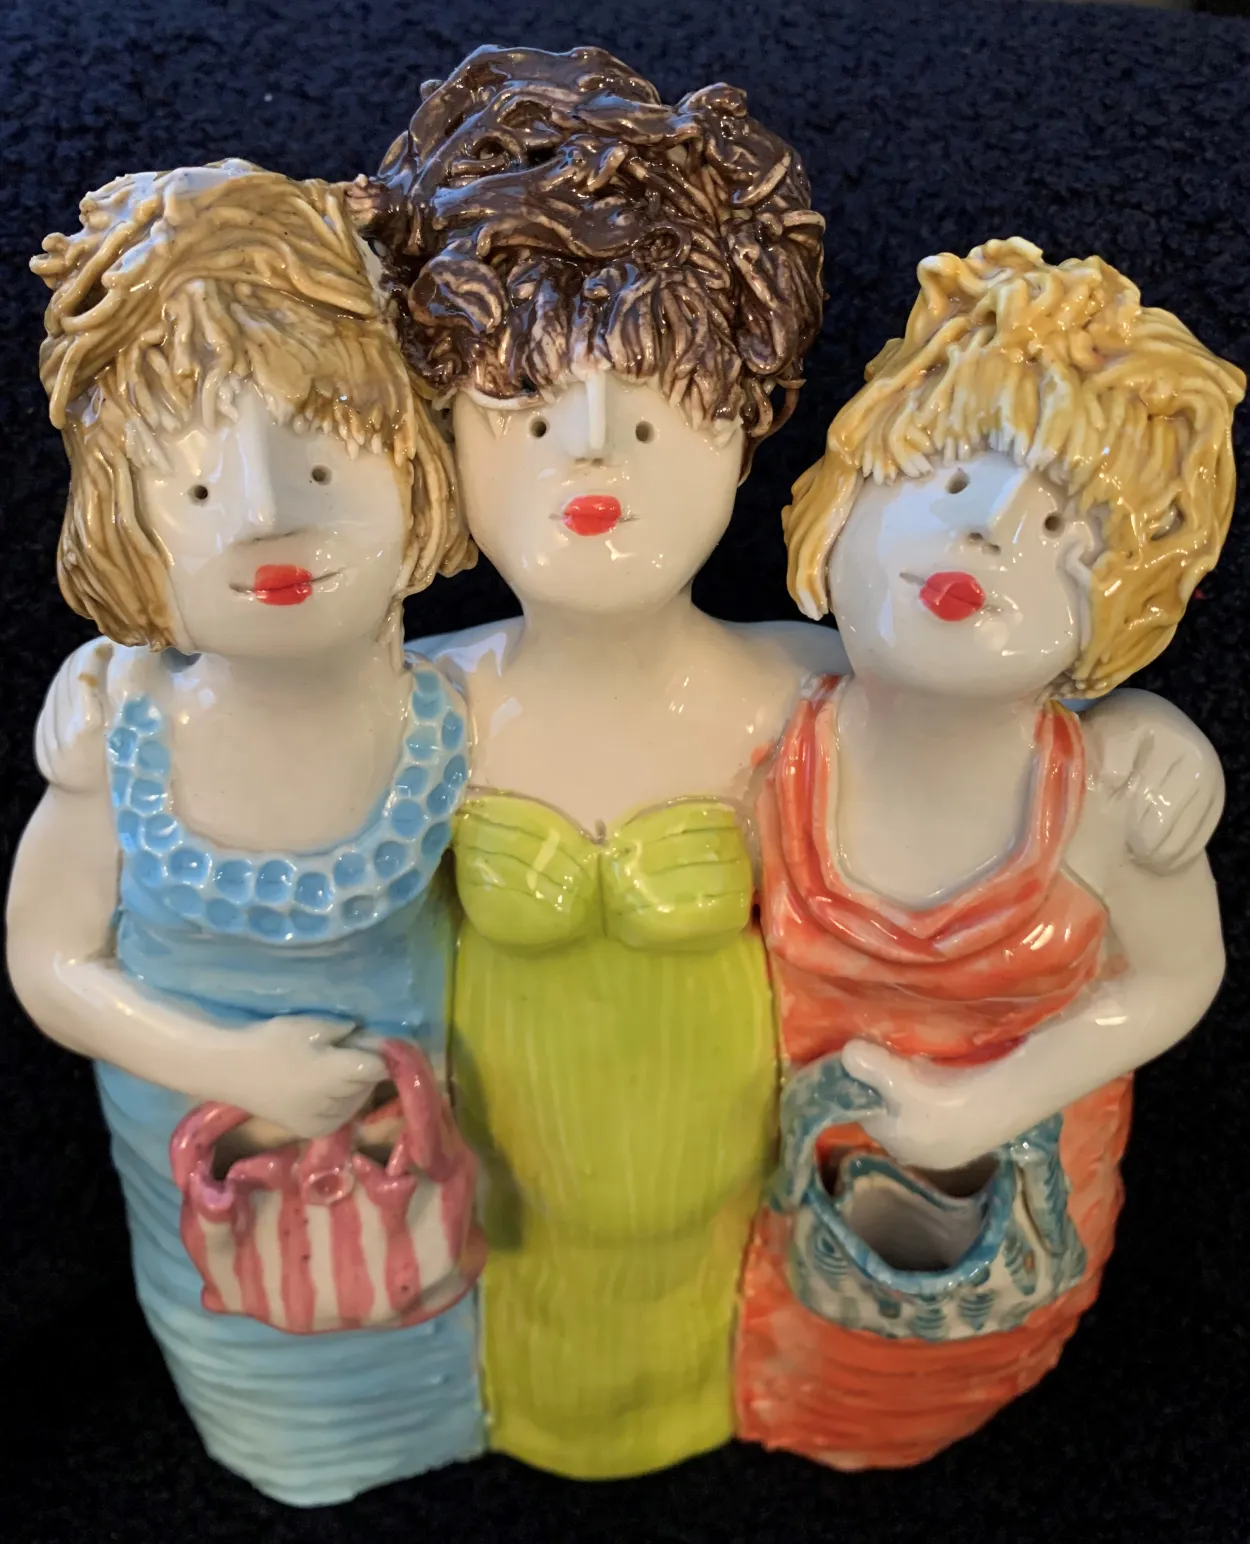 3 Lovely Ladies by Mandy Olson